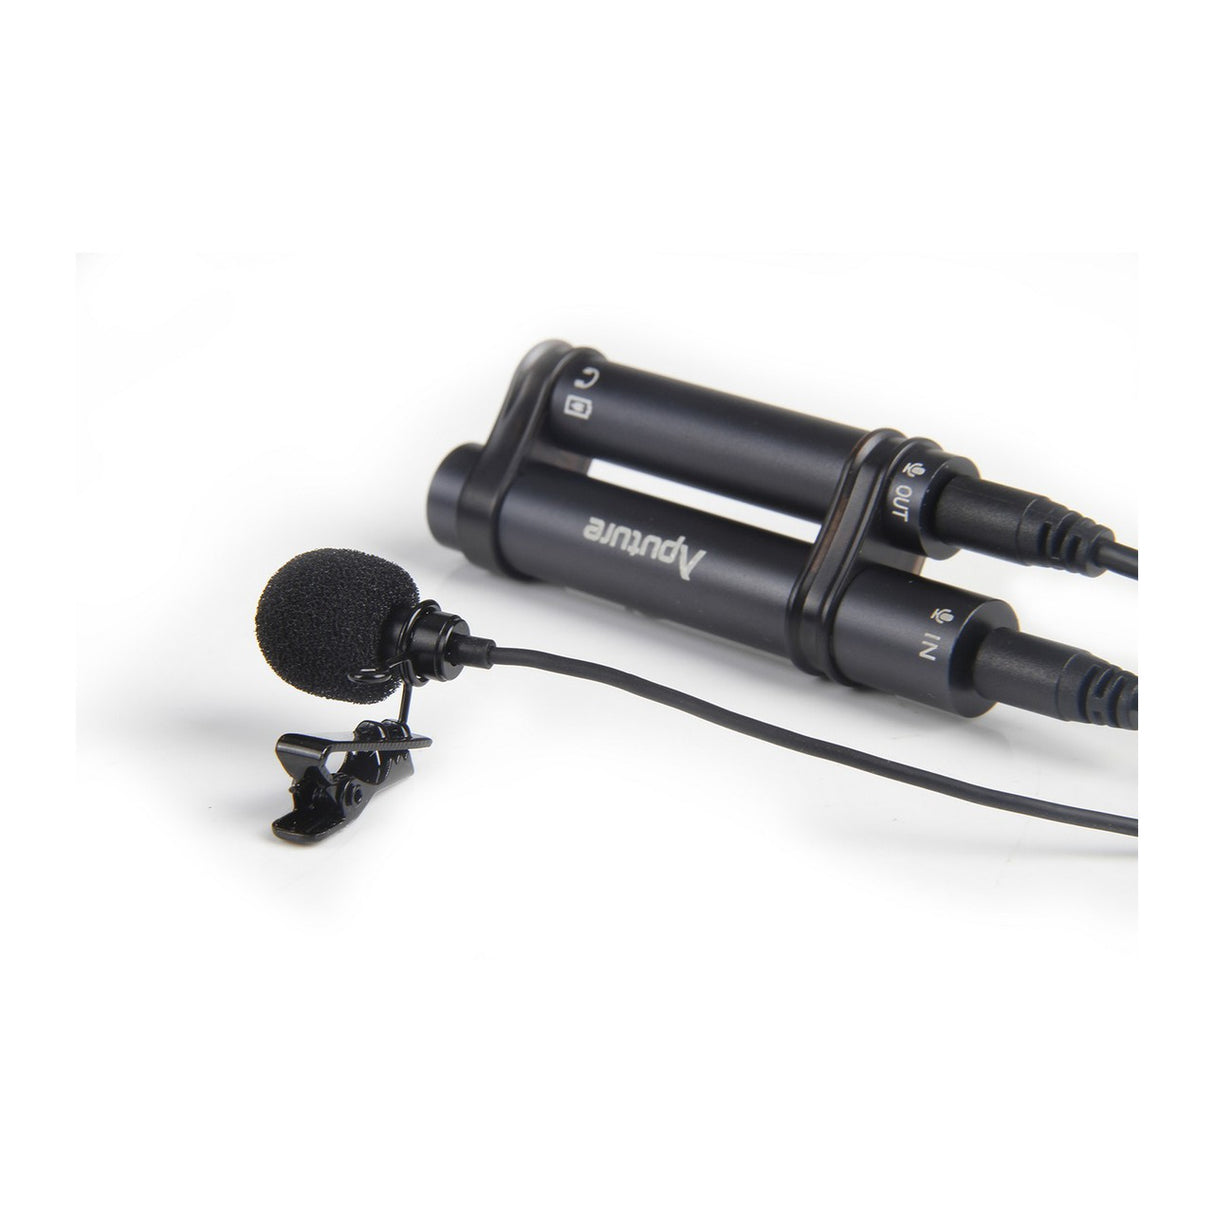 Aputure A.LAV | TRRS Connector Compatible Omnidirectional Lavalier Microphone